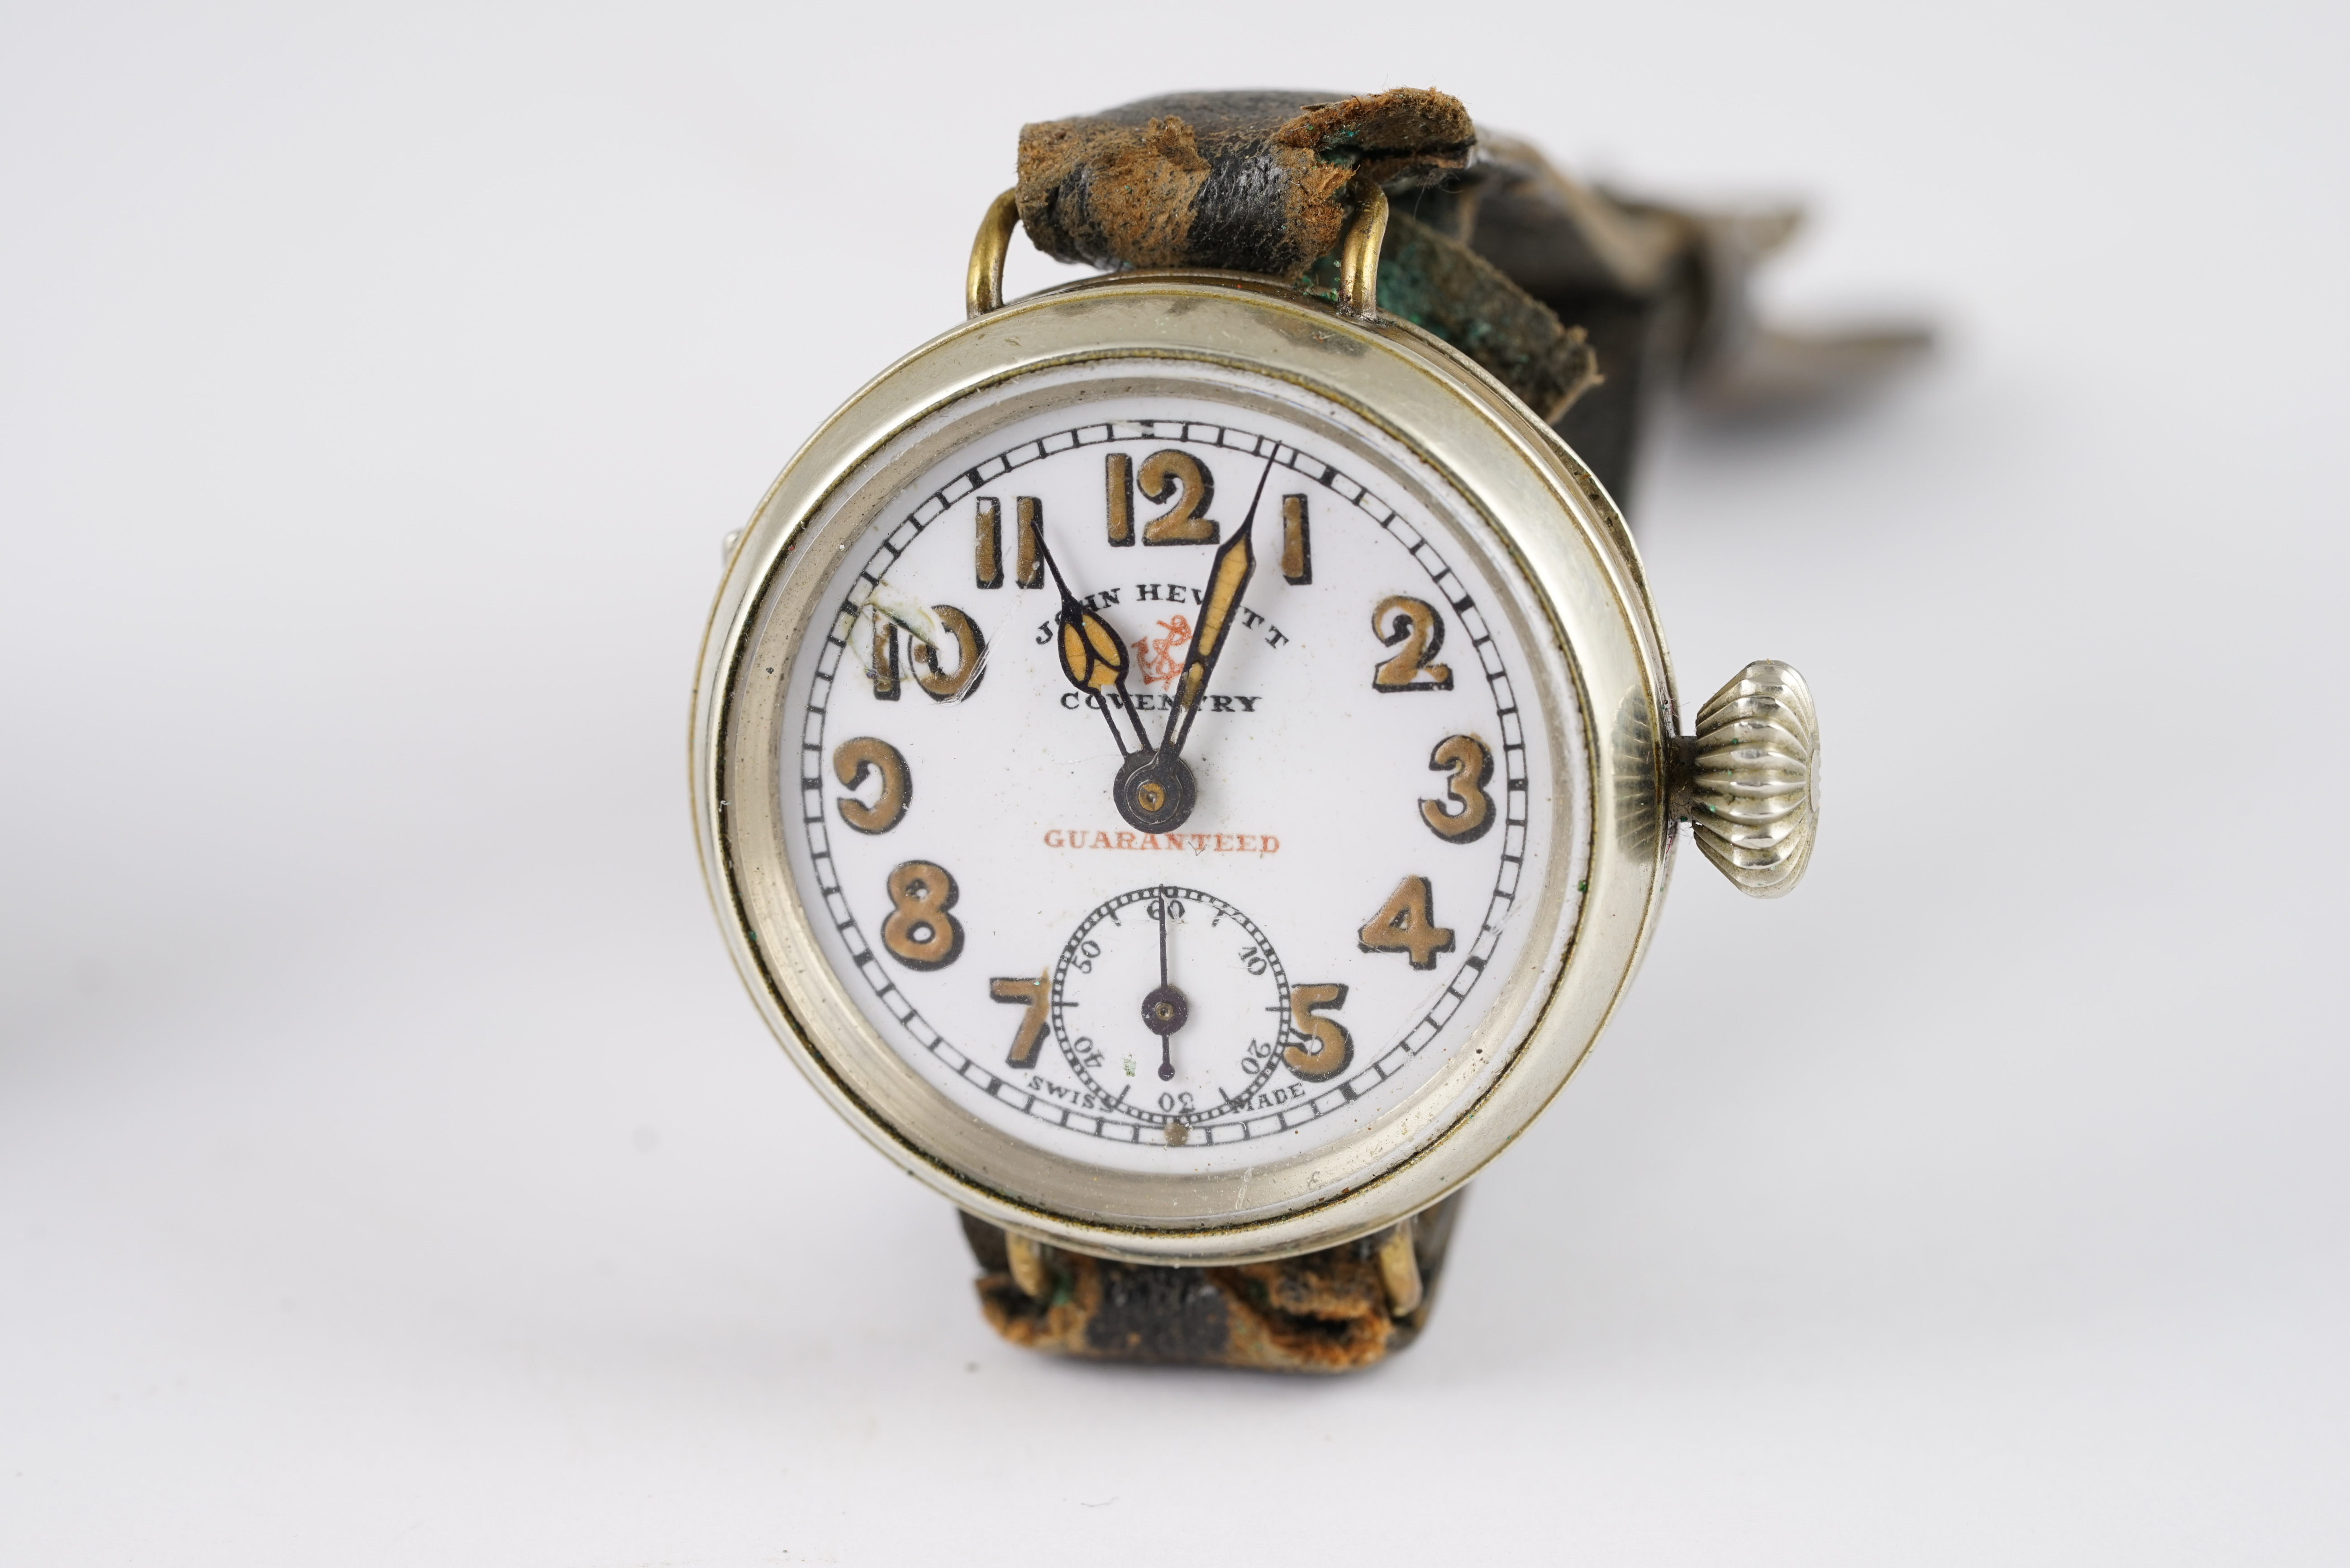 ***SOLD AS SEEN*** GROUP OF 3 WWI PERIOD TRENCH WRISTWATCH, ceramic white dial with arabic numerals, - Image 3 of 3